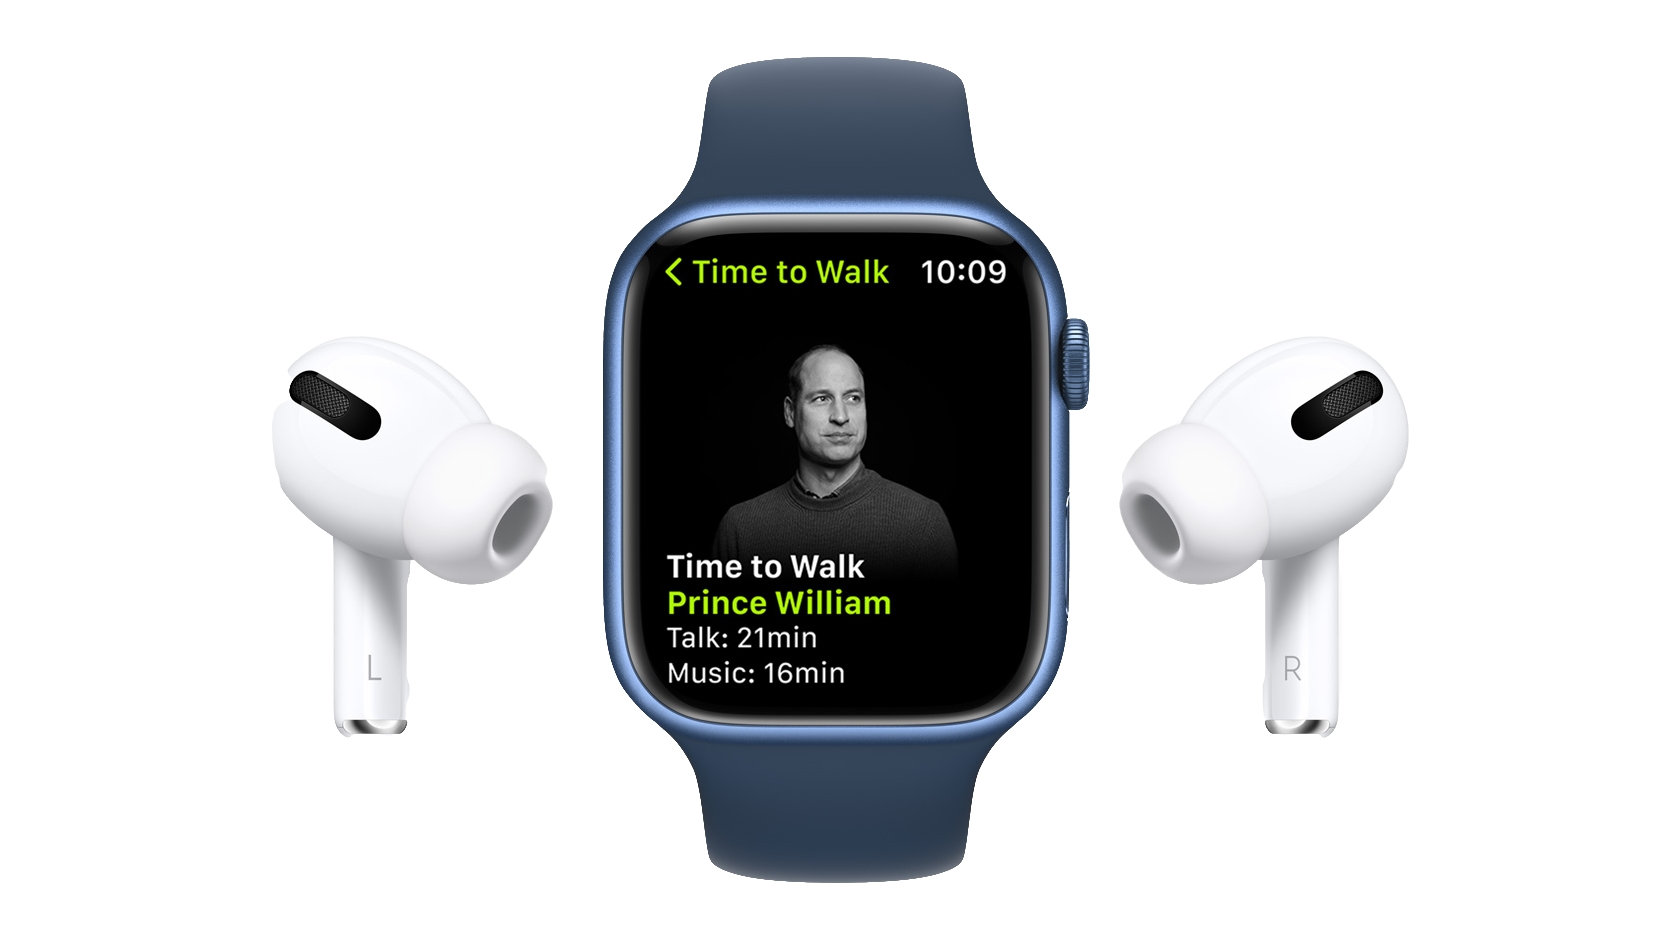 Apple's marketing image showing an Apple Watch Series 7 with a Time to Walk episode featuring Price William shown on the display, with a pair of AirPods pictured on the left and right side of the smartwatch